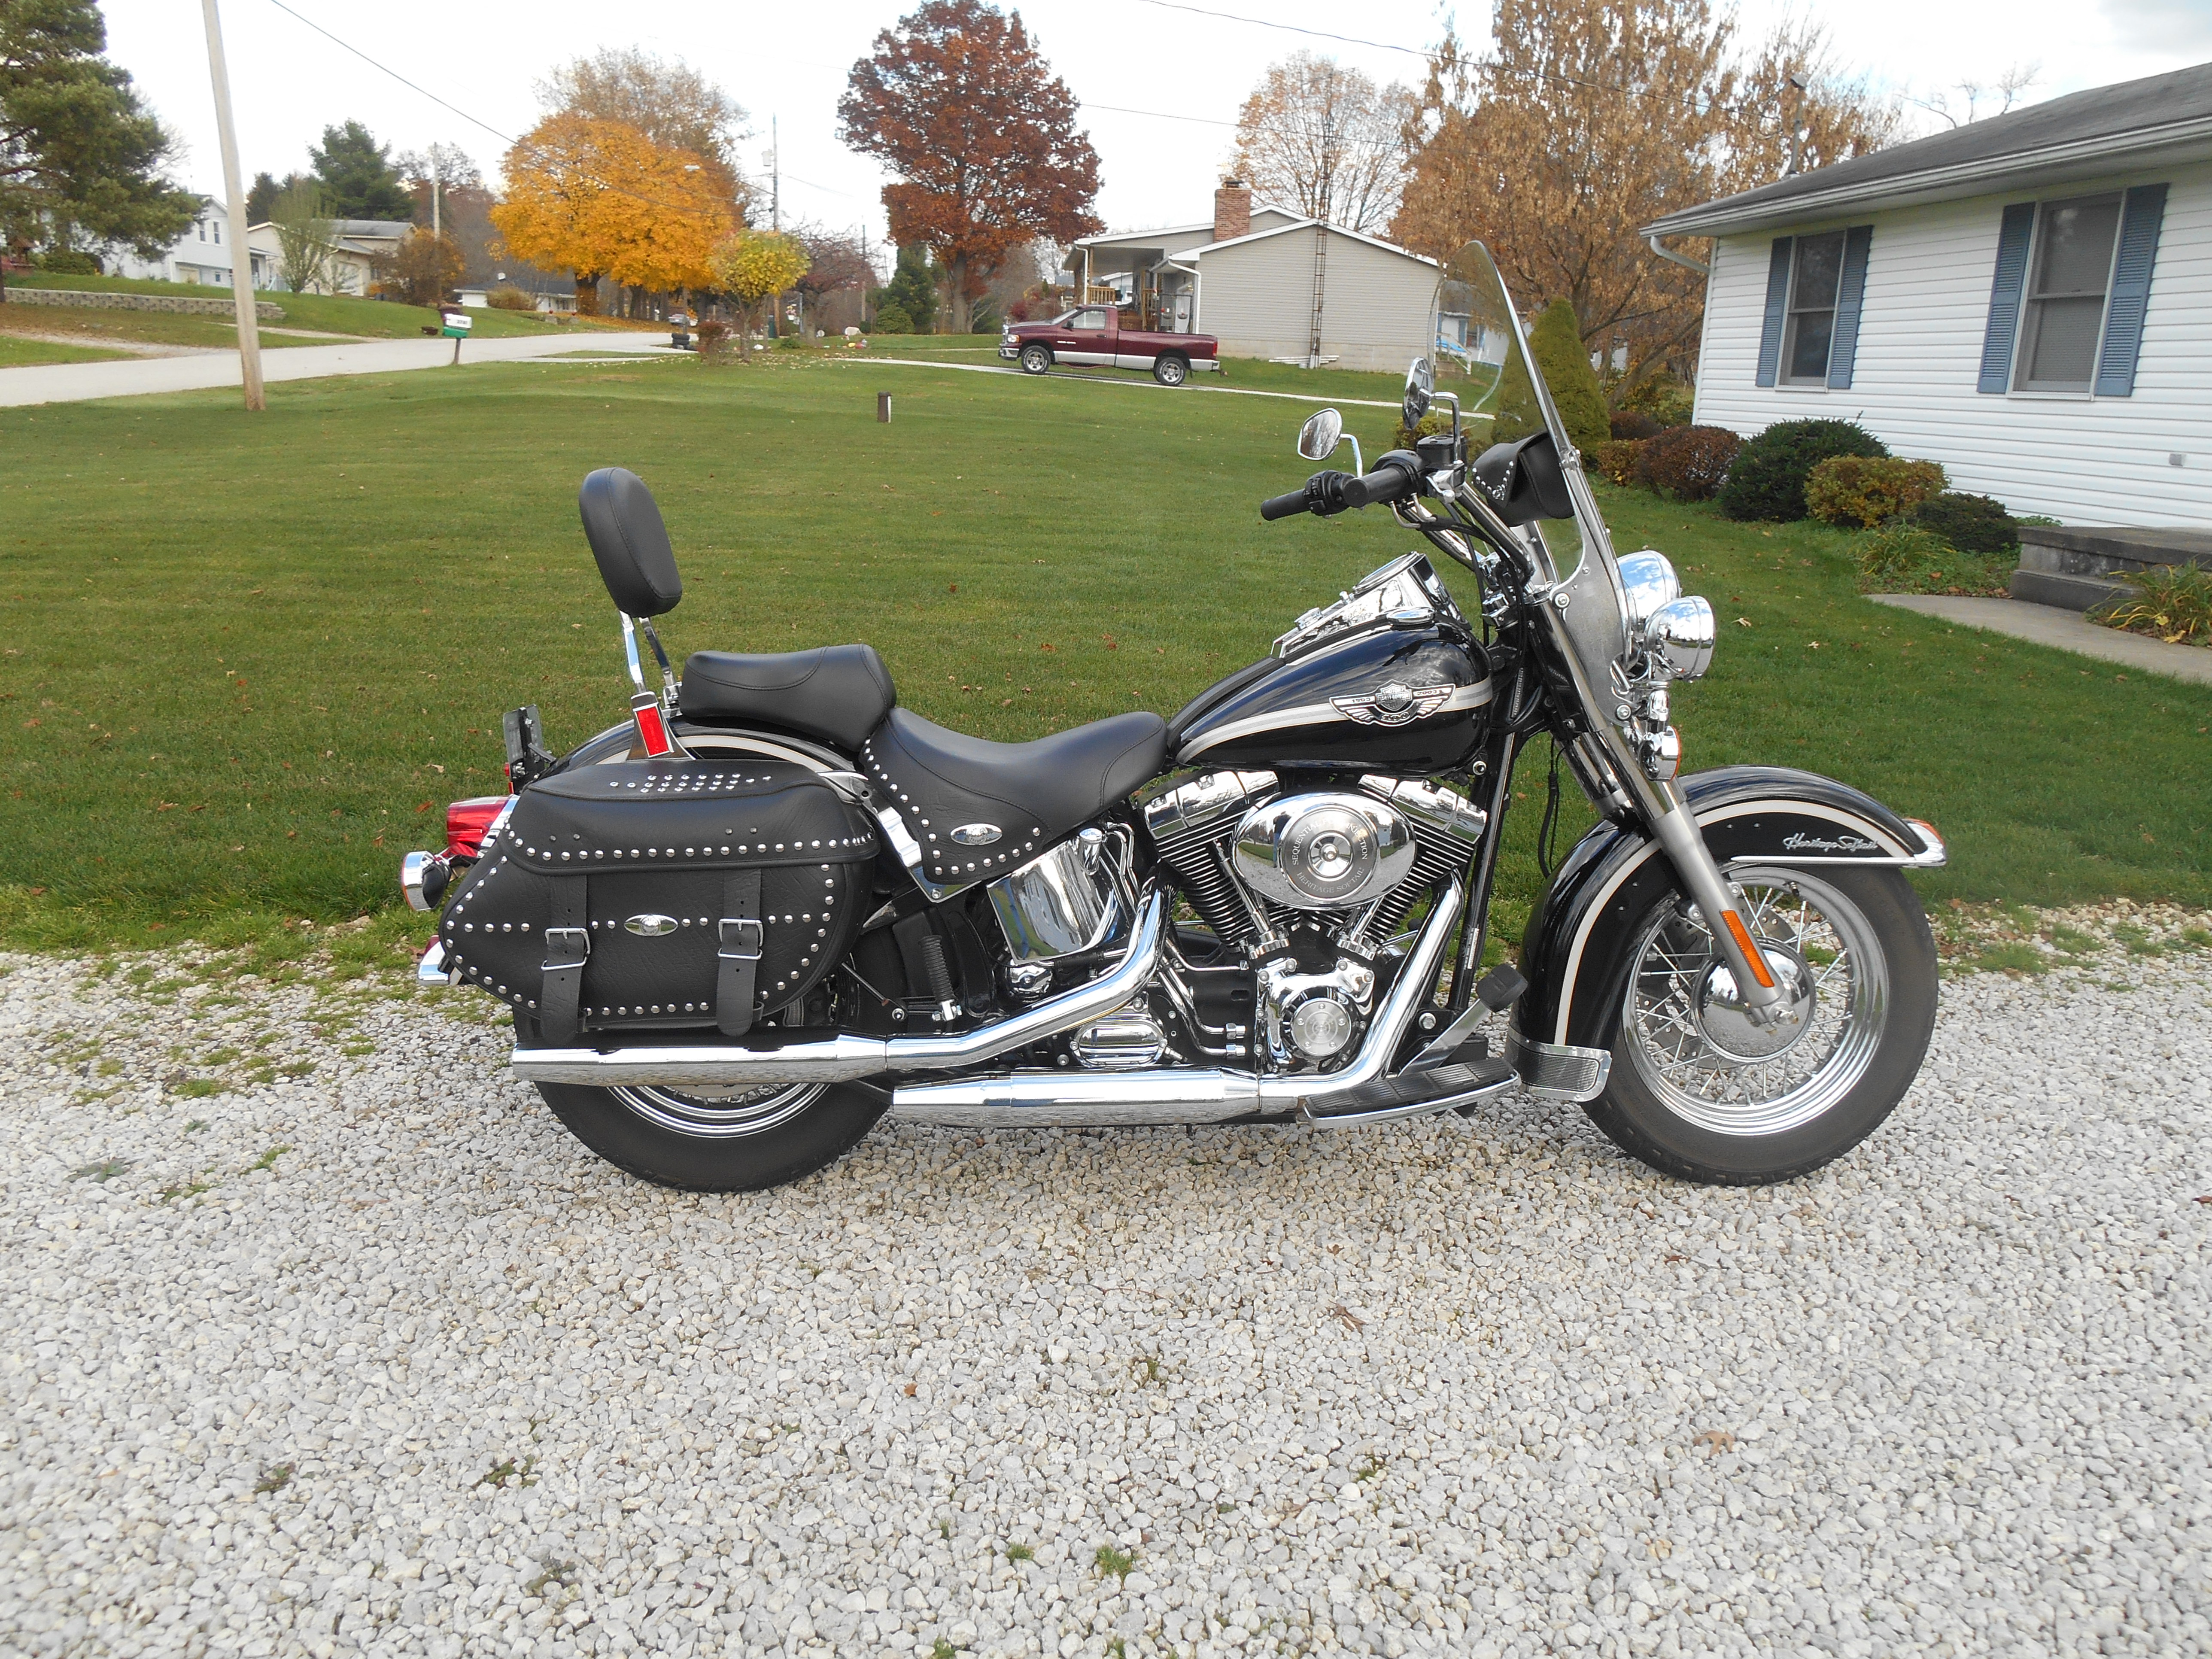 2003 Heritage Softail Classic 100th Anniversary - Harley Davidson Forums